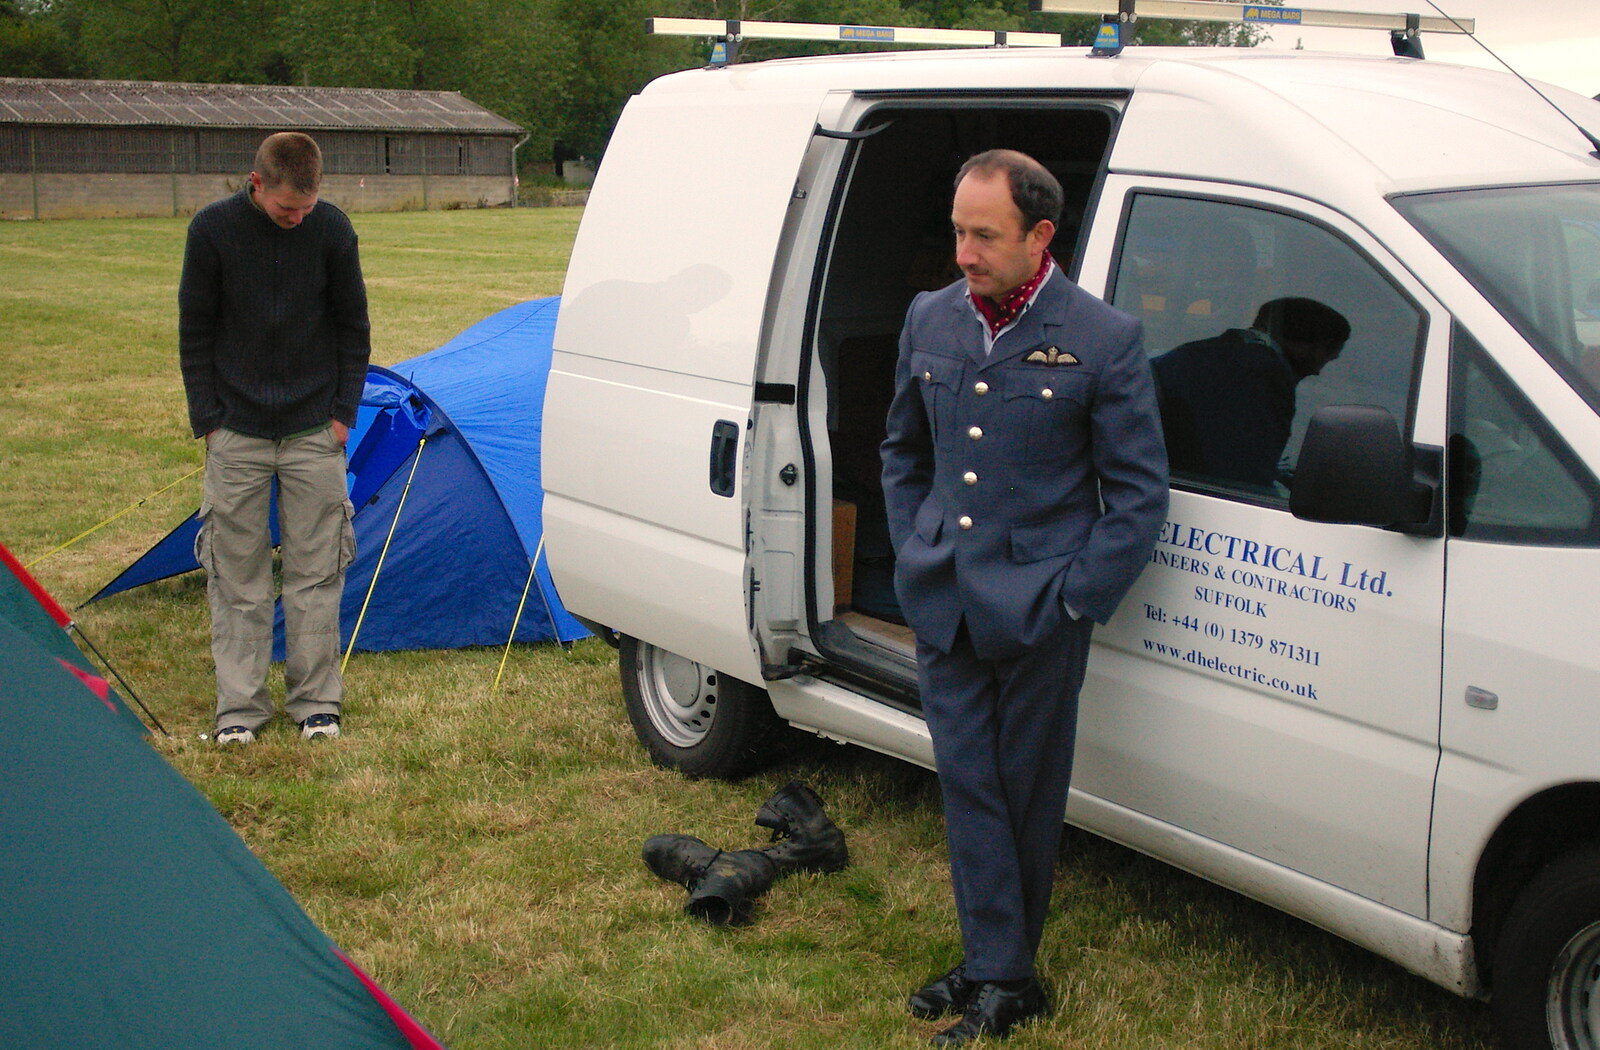 DH stands by his 'tent' from A 1940s VE Dance At Debach Airfield, Debach, Suffolk - 11th June 2005